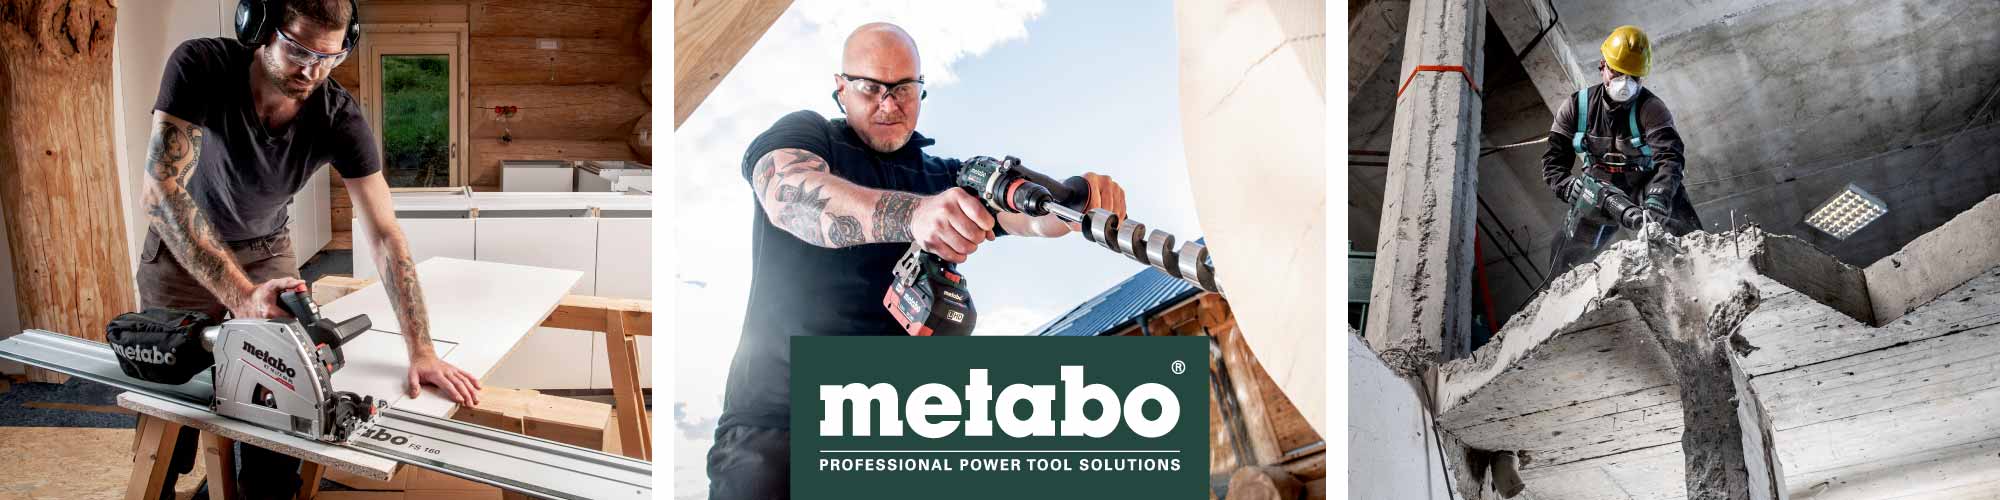 METABO Brand Store